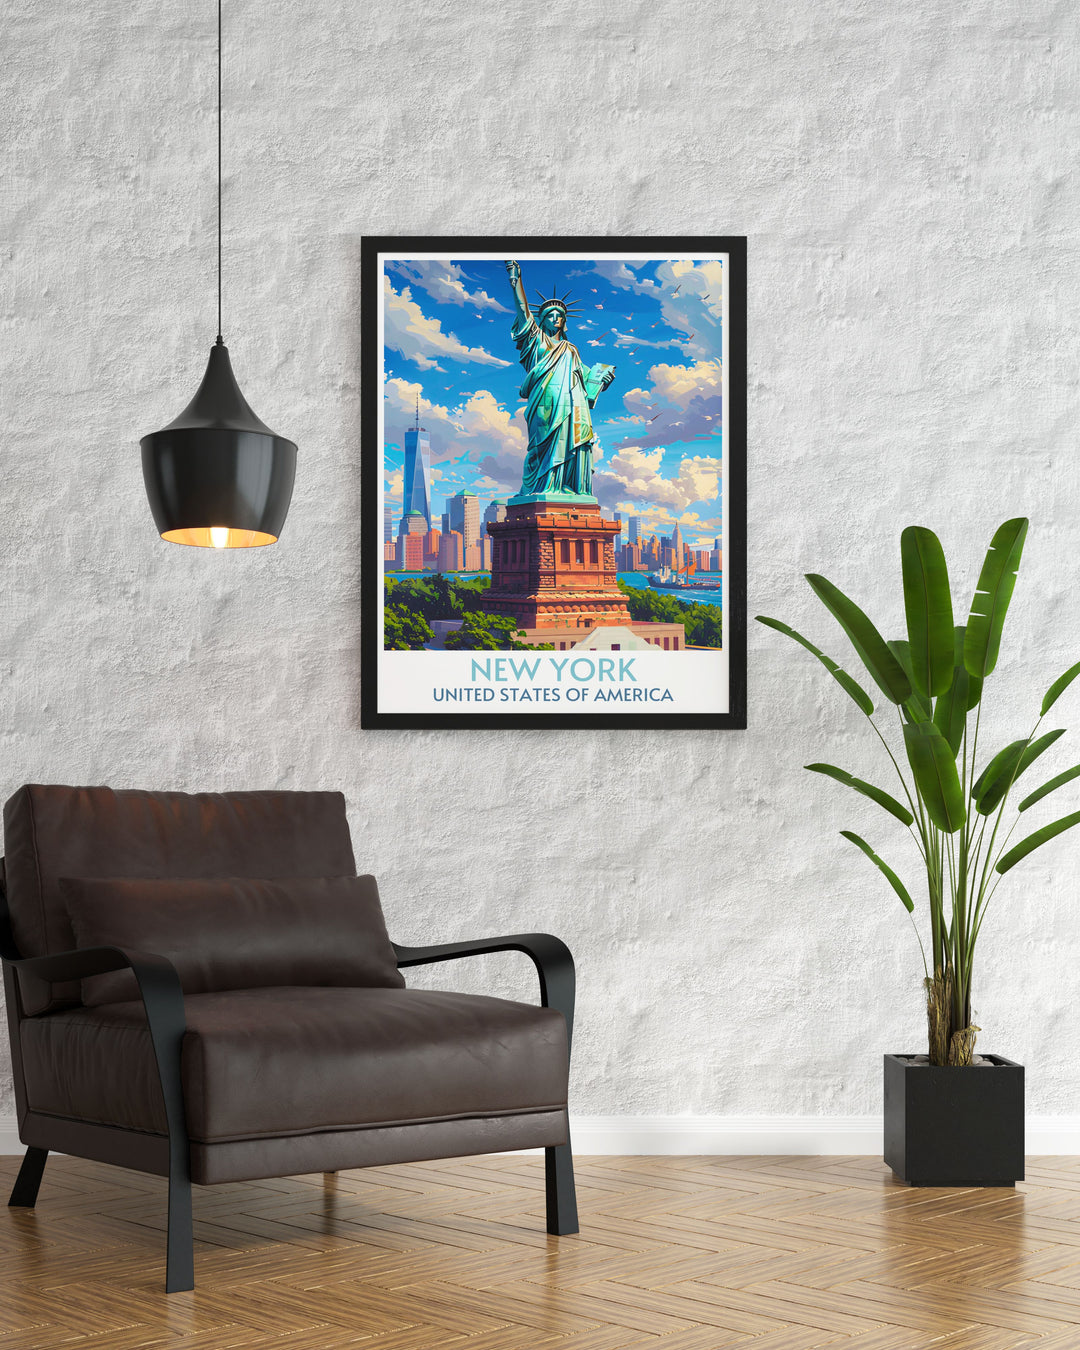 Modern wall decor featuring the Statue of Liberty, blending historical significance with contemporary style.